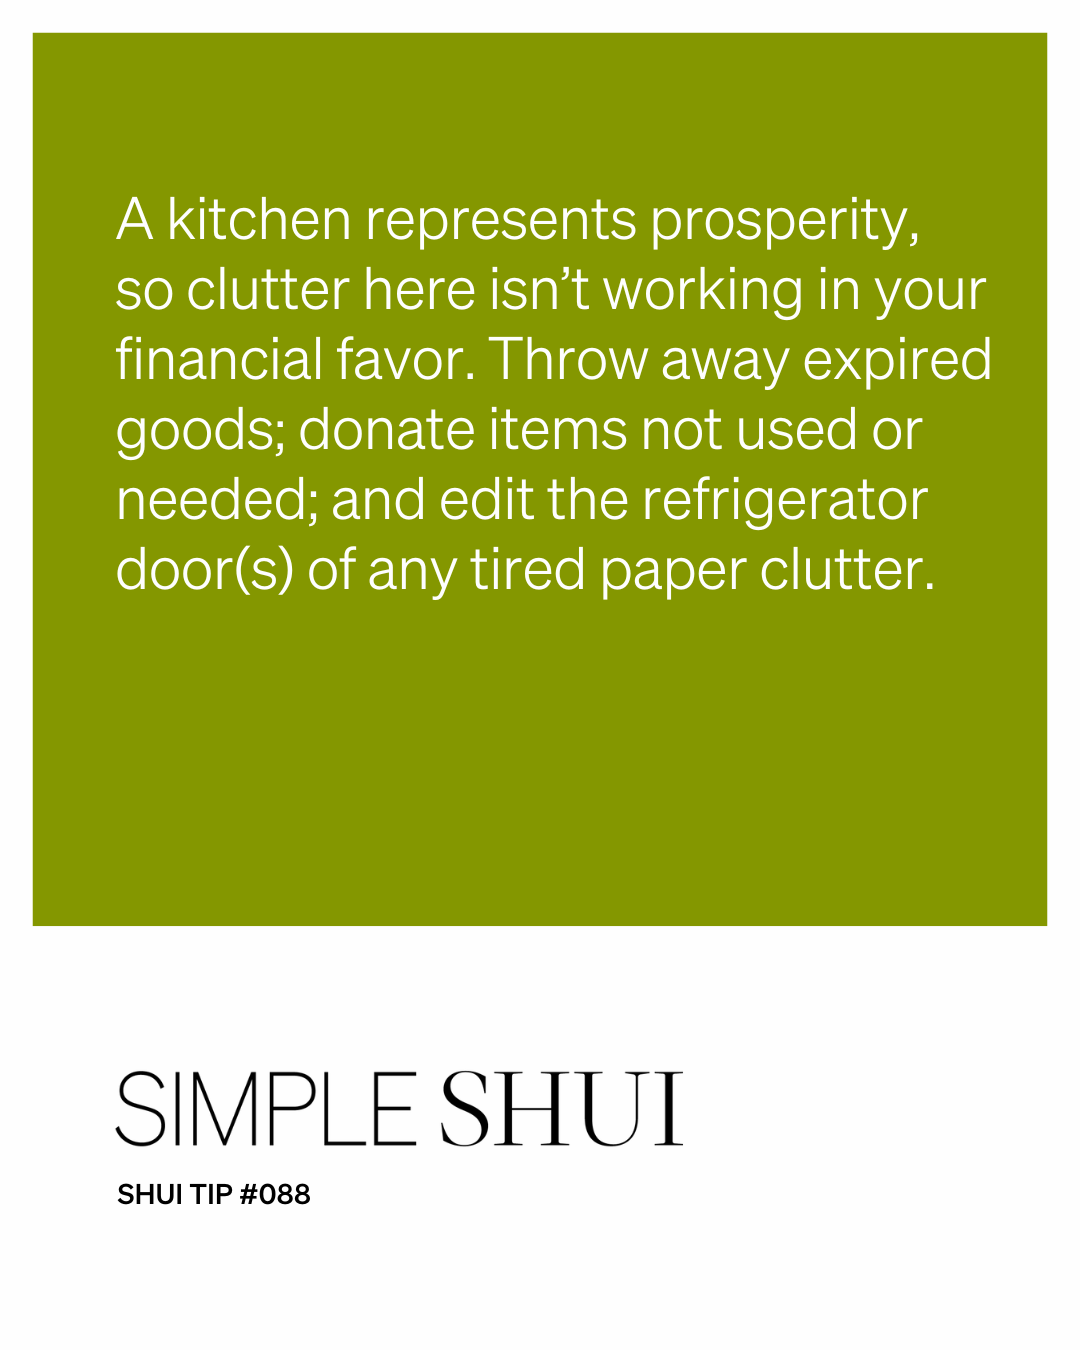 simple shui tip: call in prosperity (from your kitchen!)